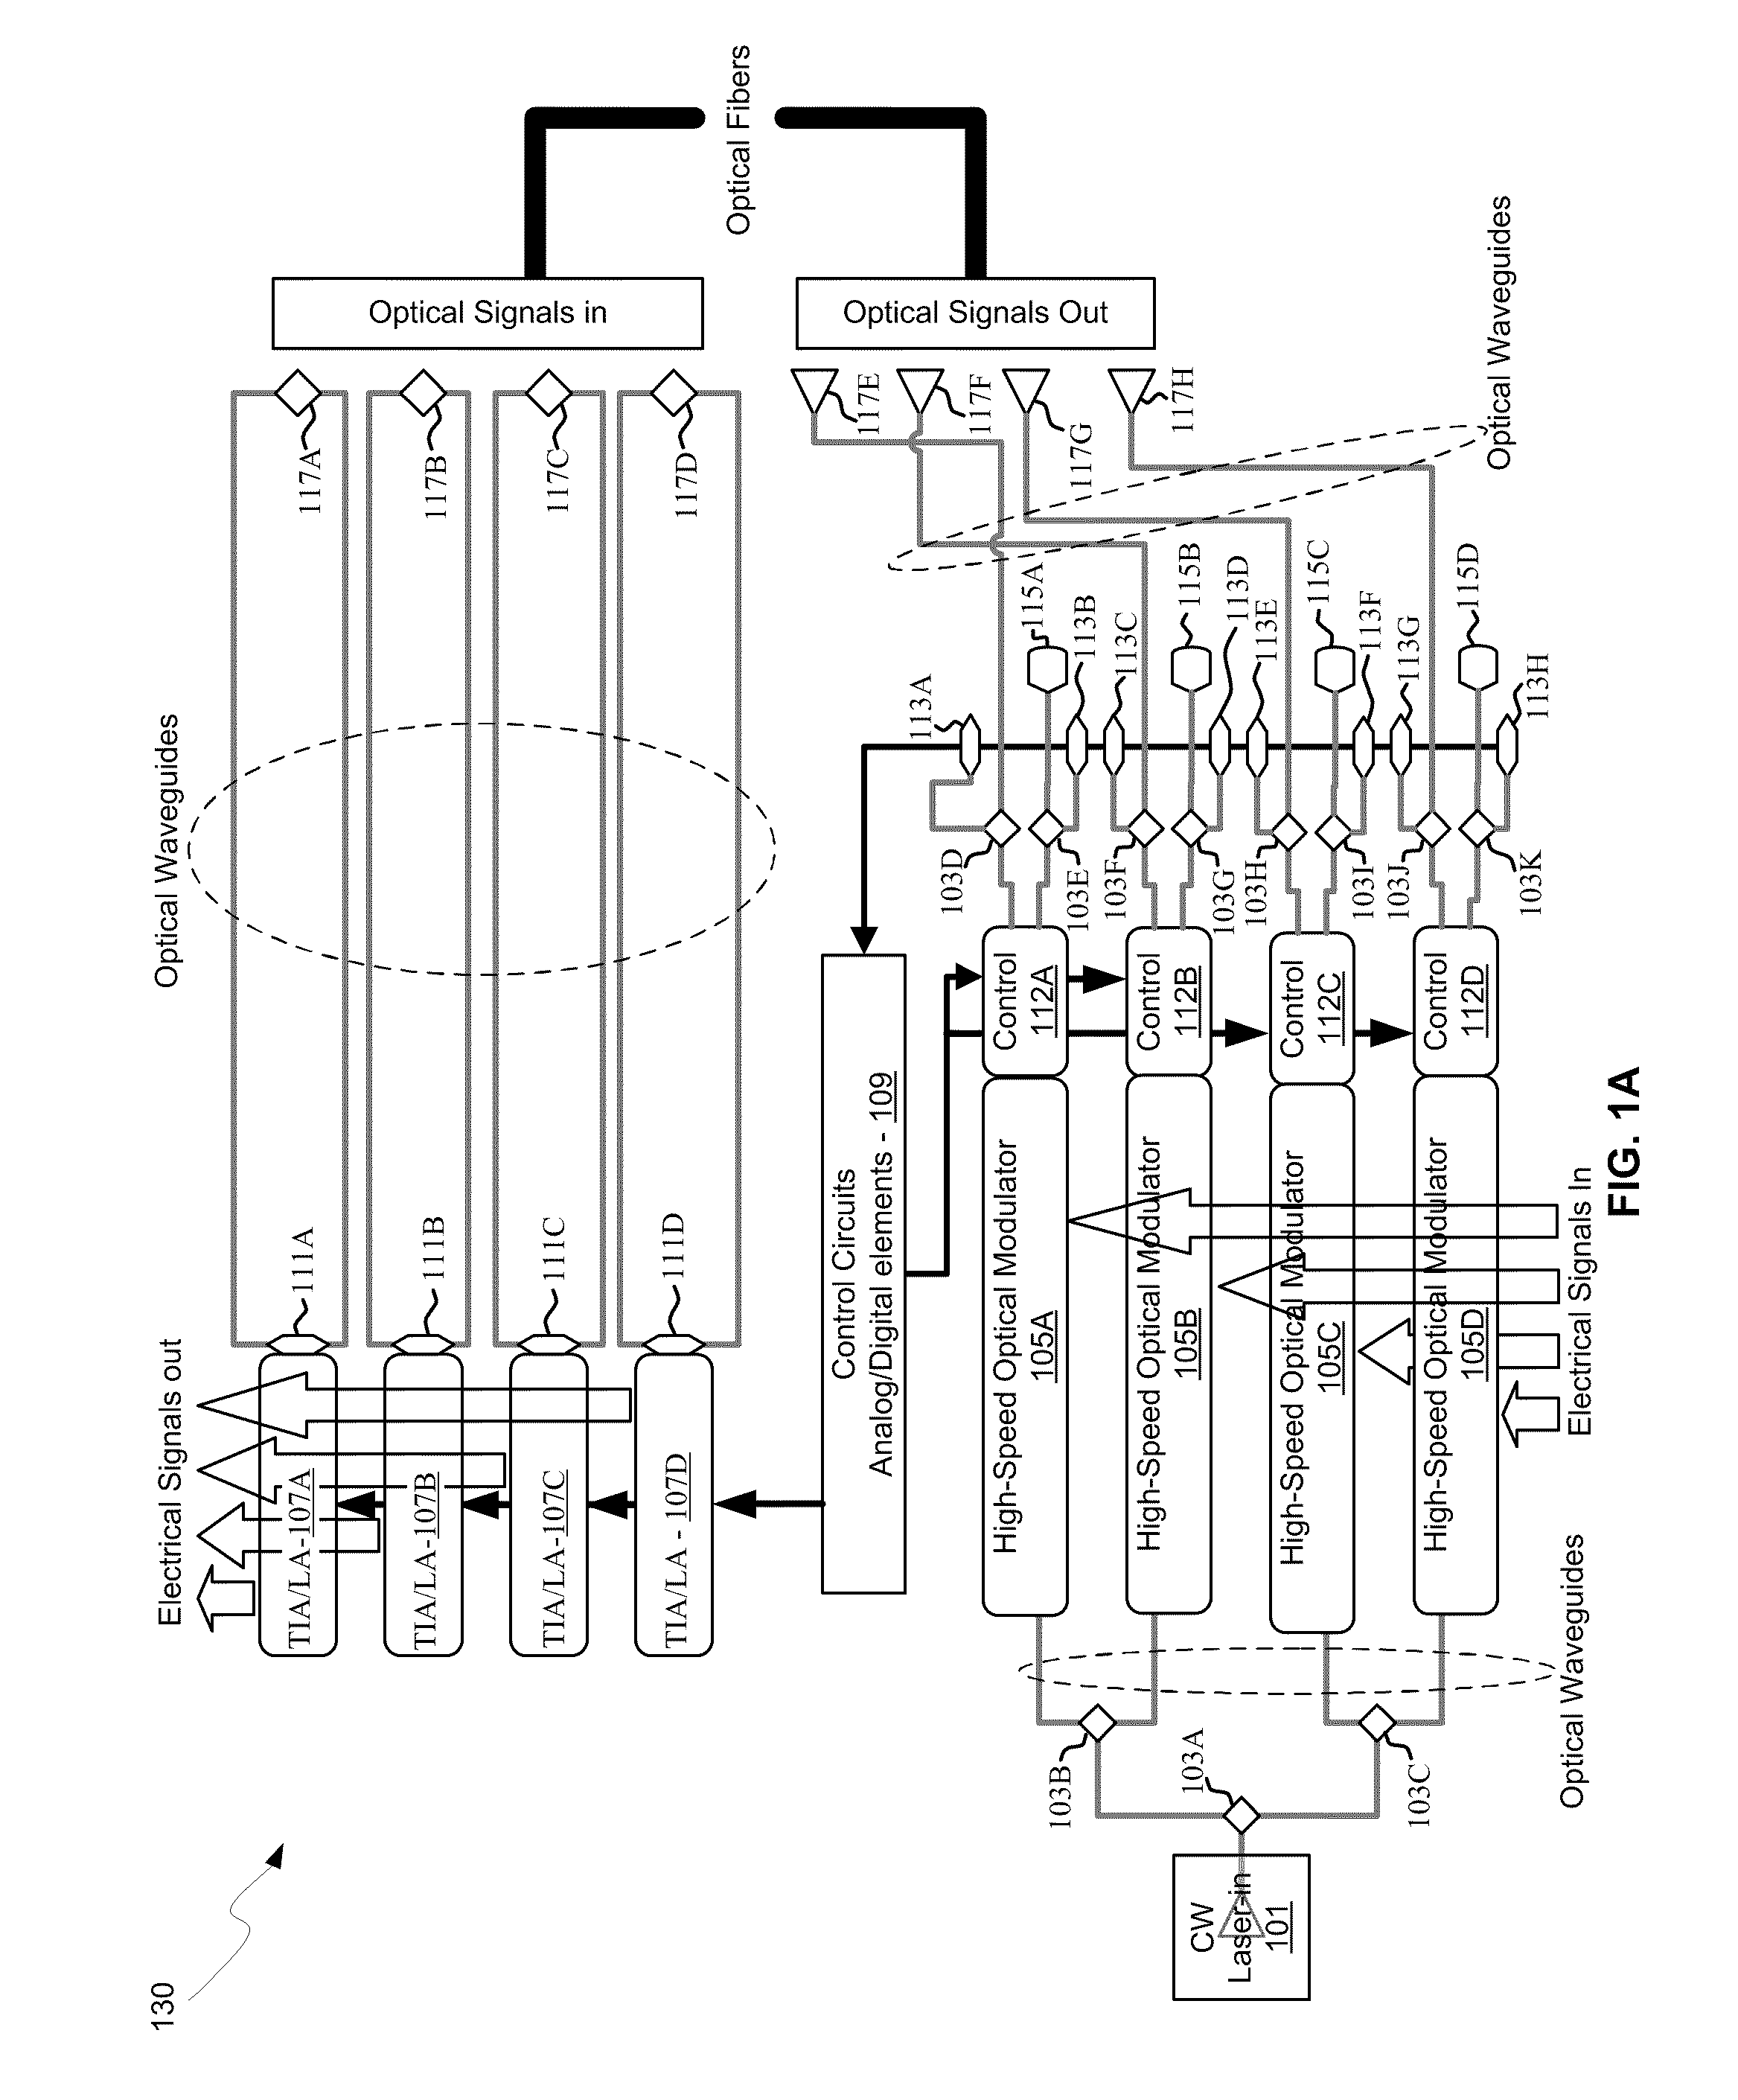 Method and system for monolithic integration of photonics and electronics in CMOS processes